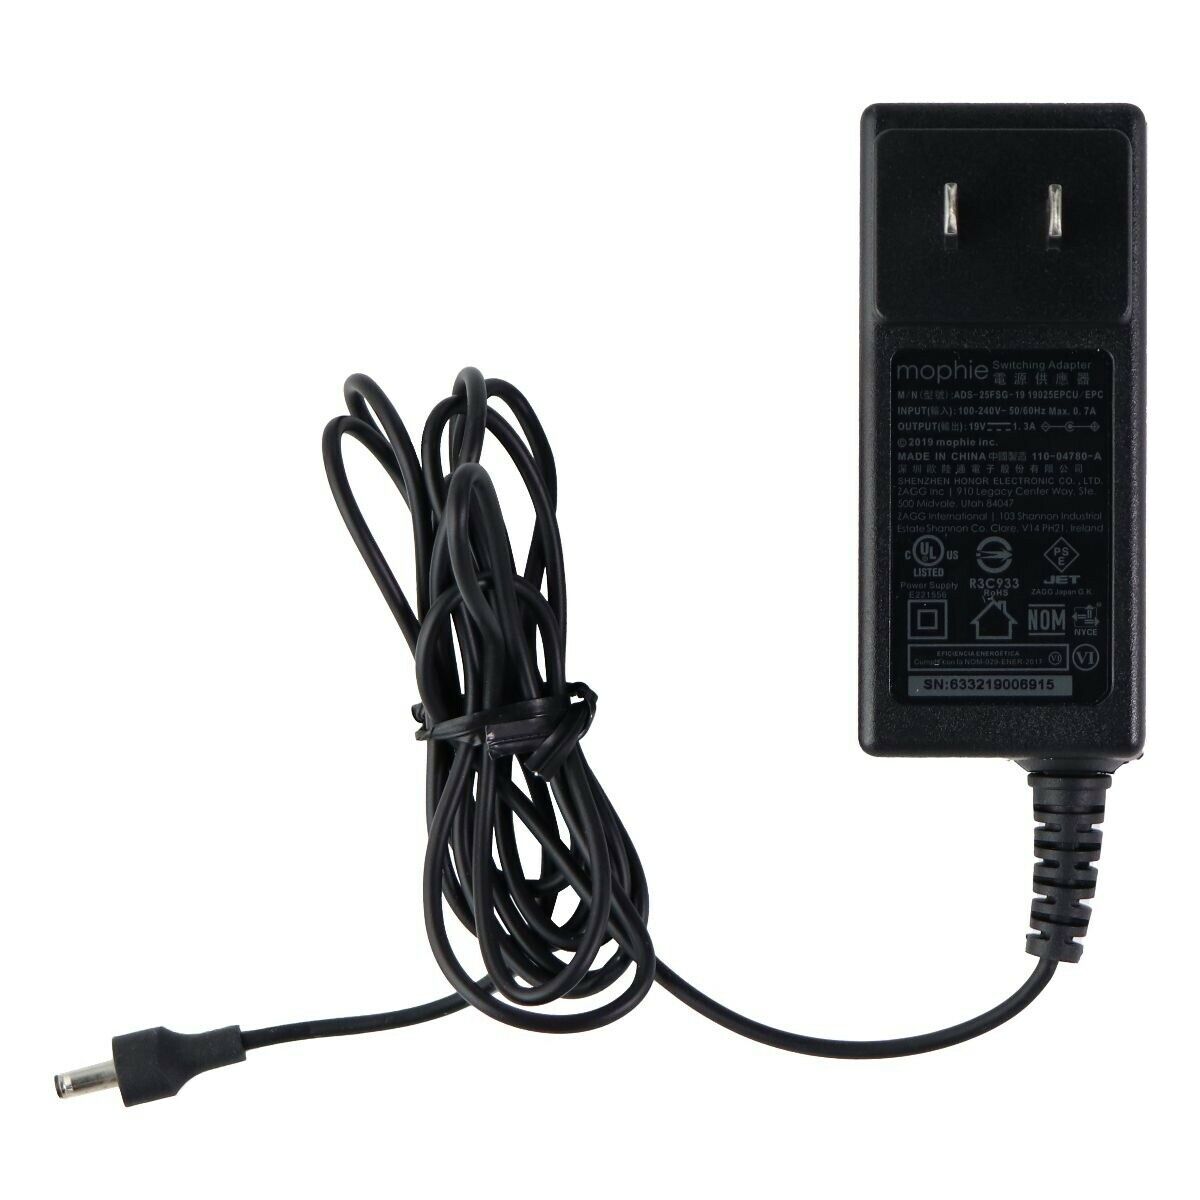 Mophie (19V/1.3A) Wall Charger Power Adapter - Black (ADS-25FSG-19) Brand: Mophie MPN: ADS-25FSG-19 UPC: 249612135